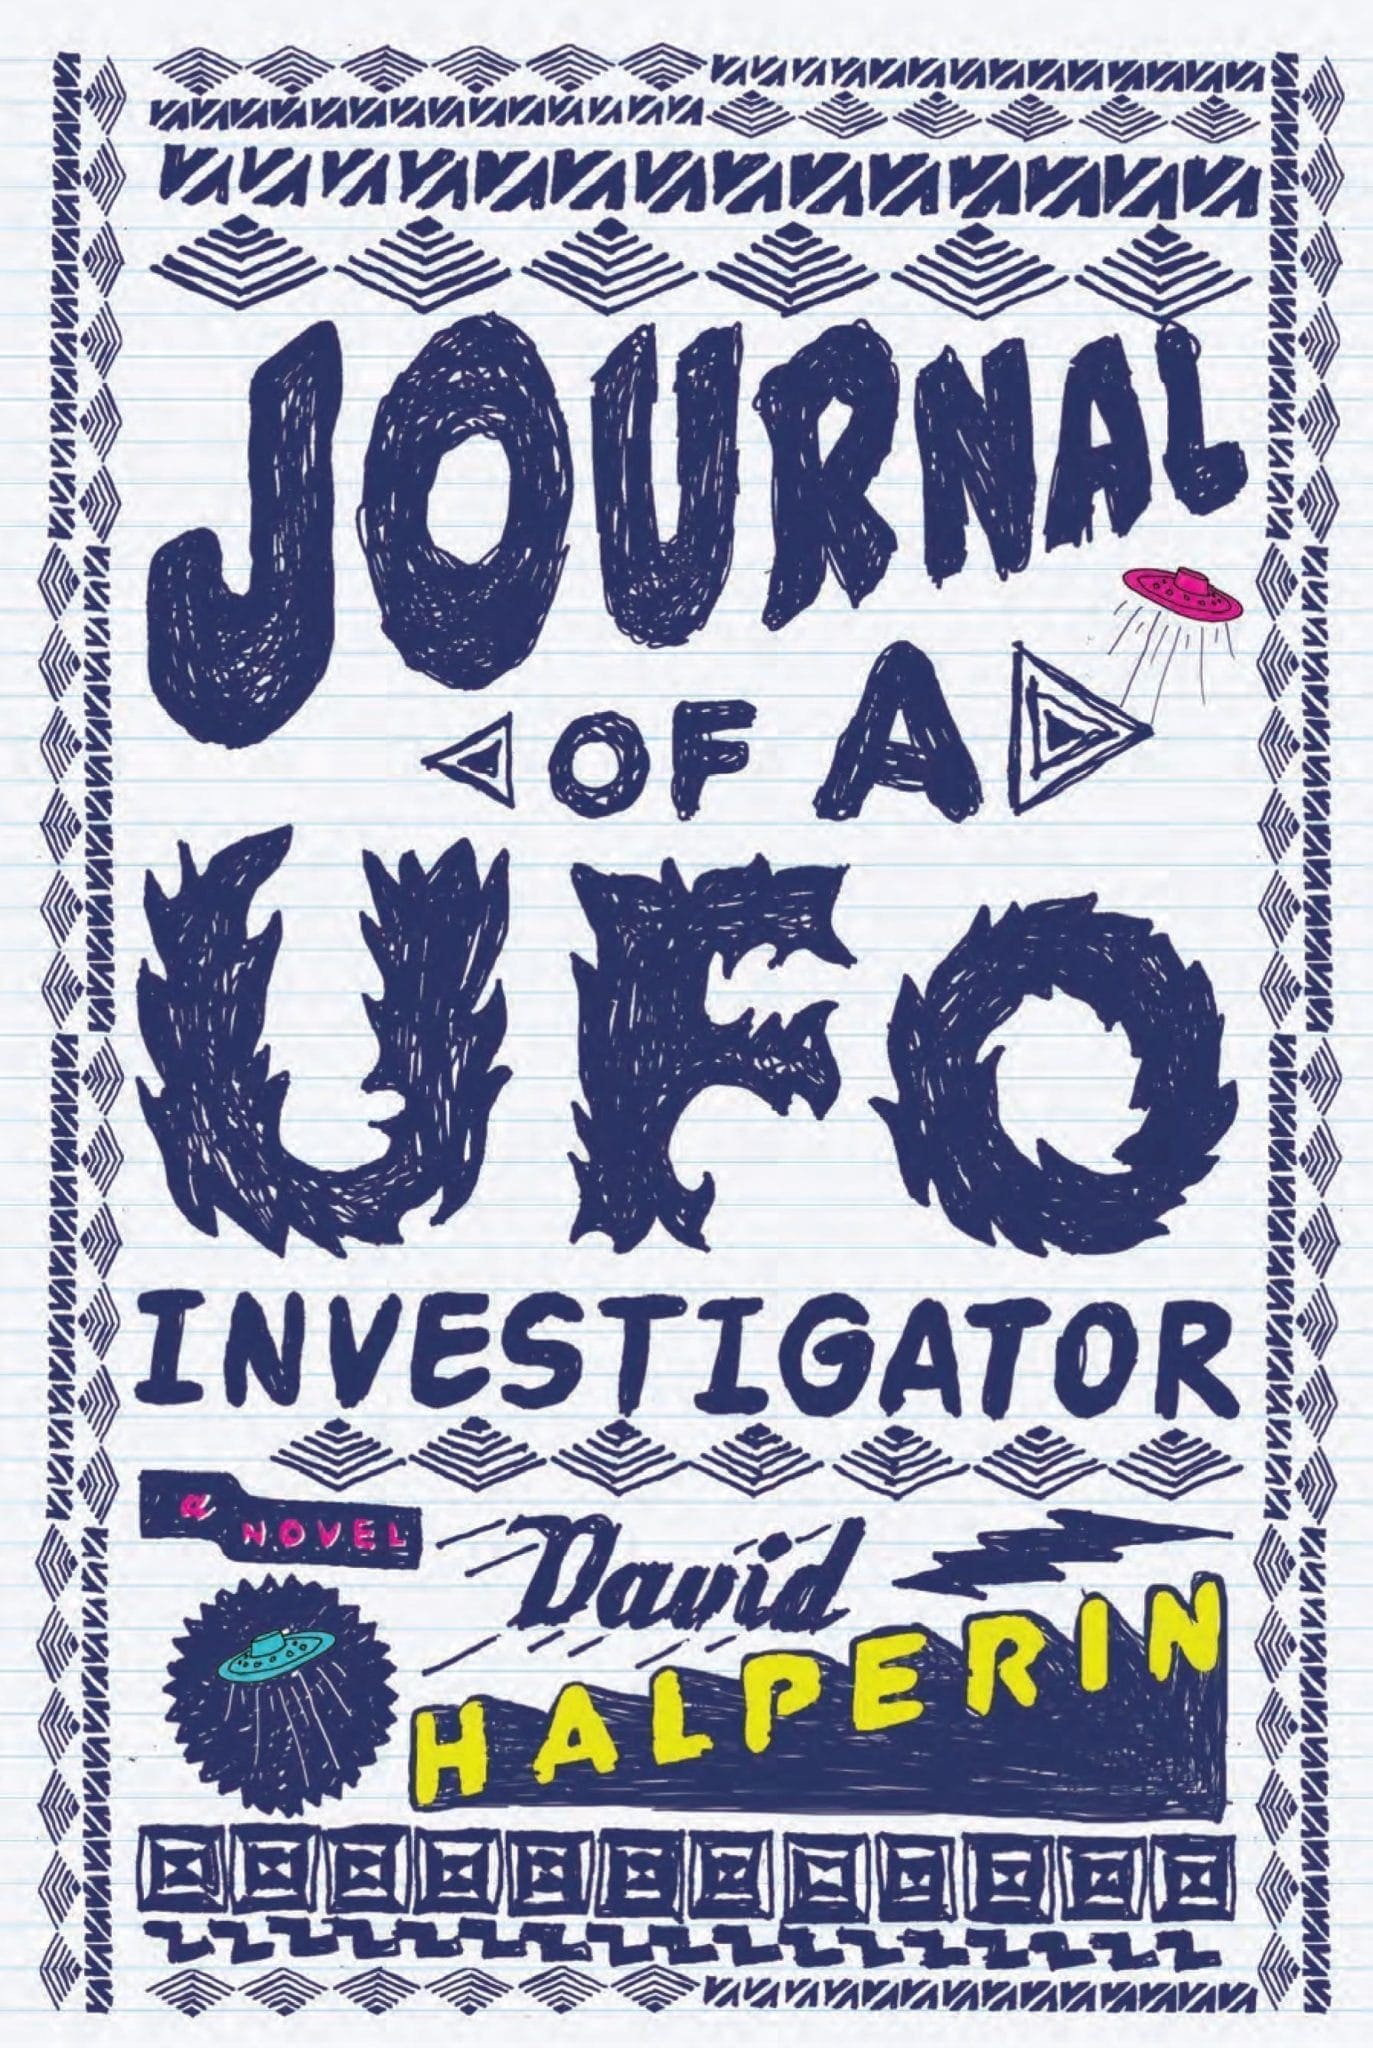 Book Review: Journal of a UFO Investigator by David Halperin